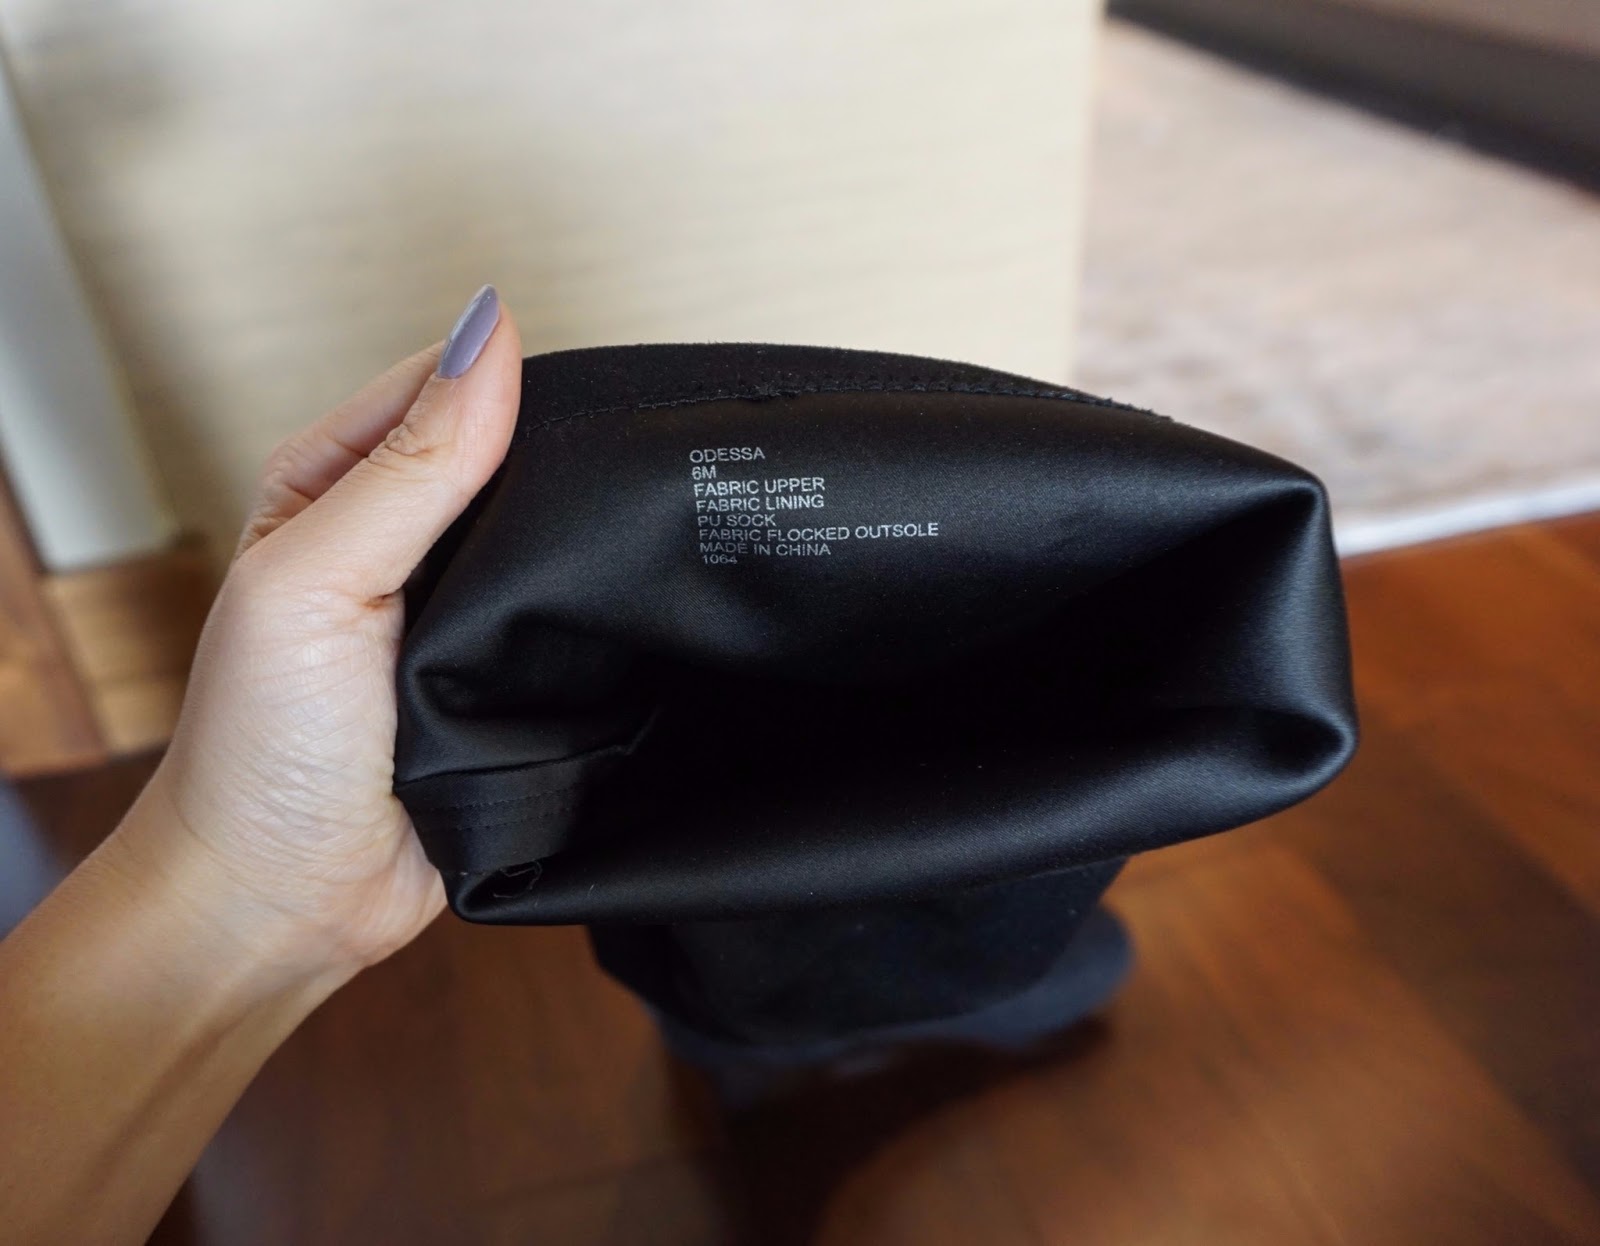 Chloe C Clutch with Chain: One Year Review — Raincouver Beauty